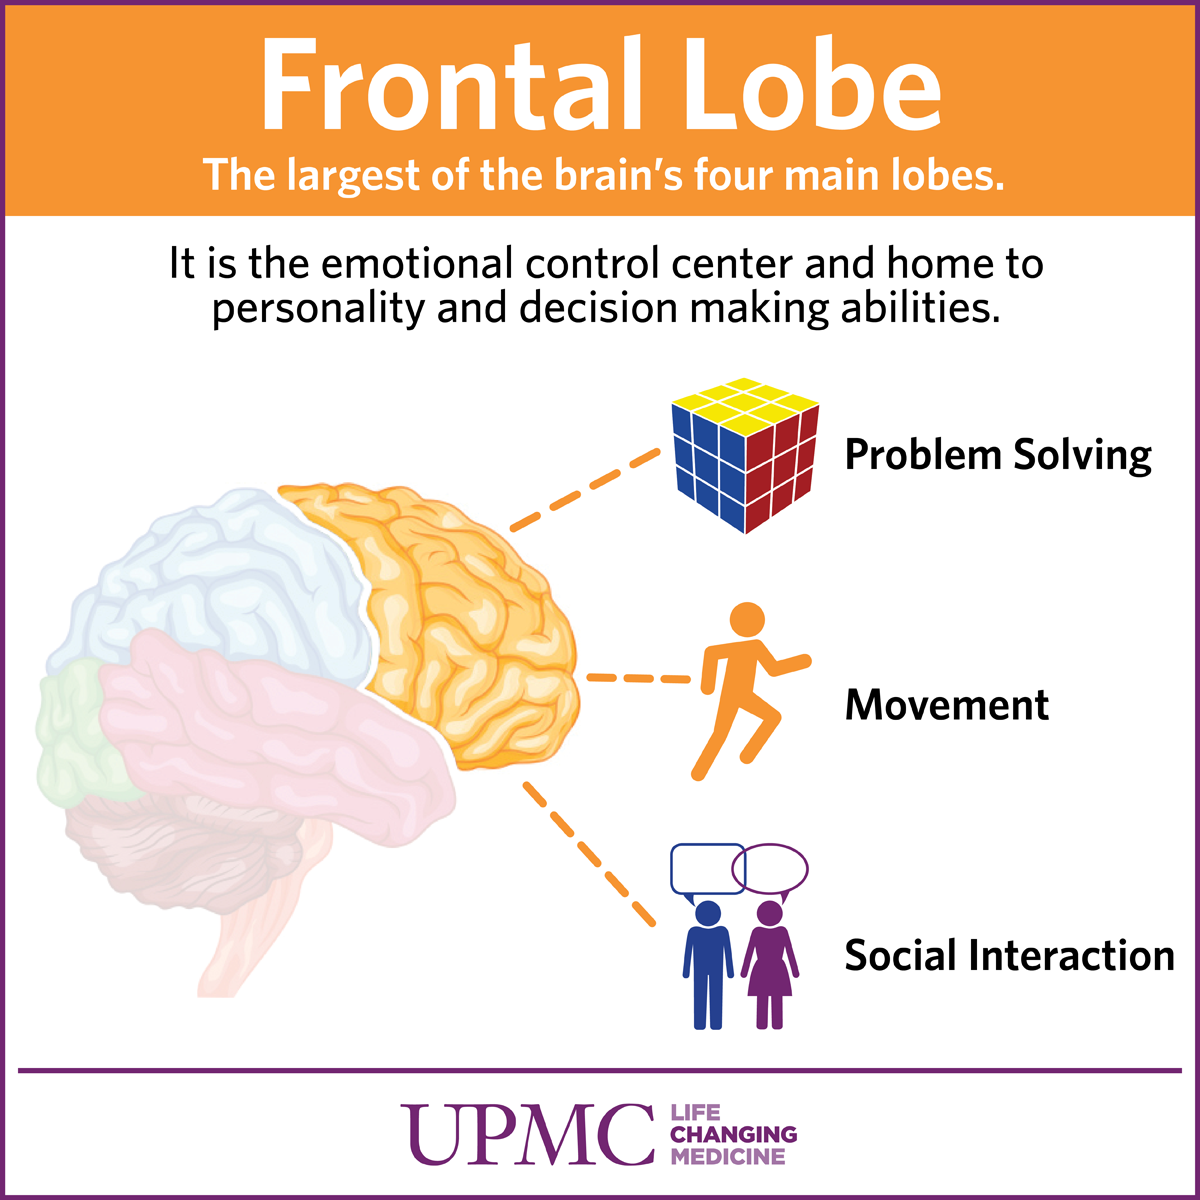 Get To Know Your Brain: The Frontal Lobe | UPMC HealthBeat